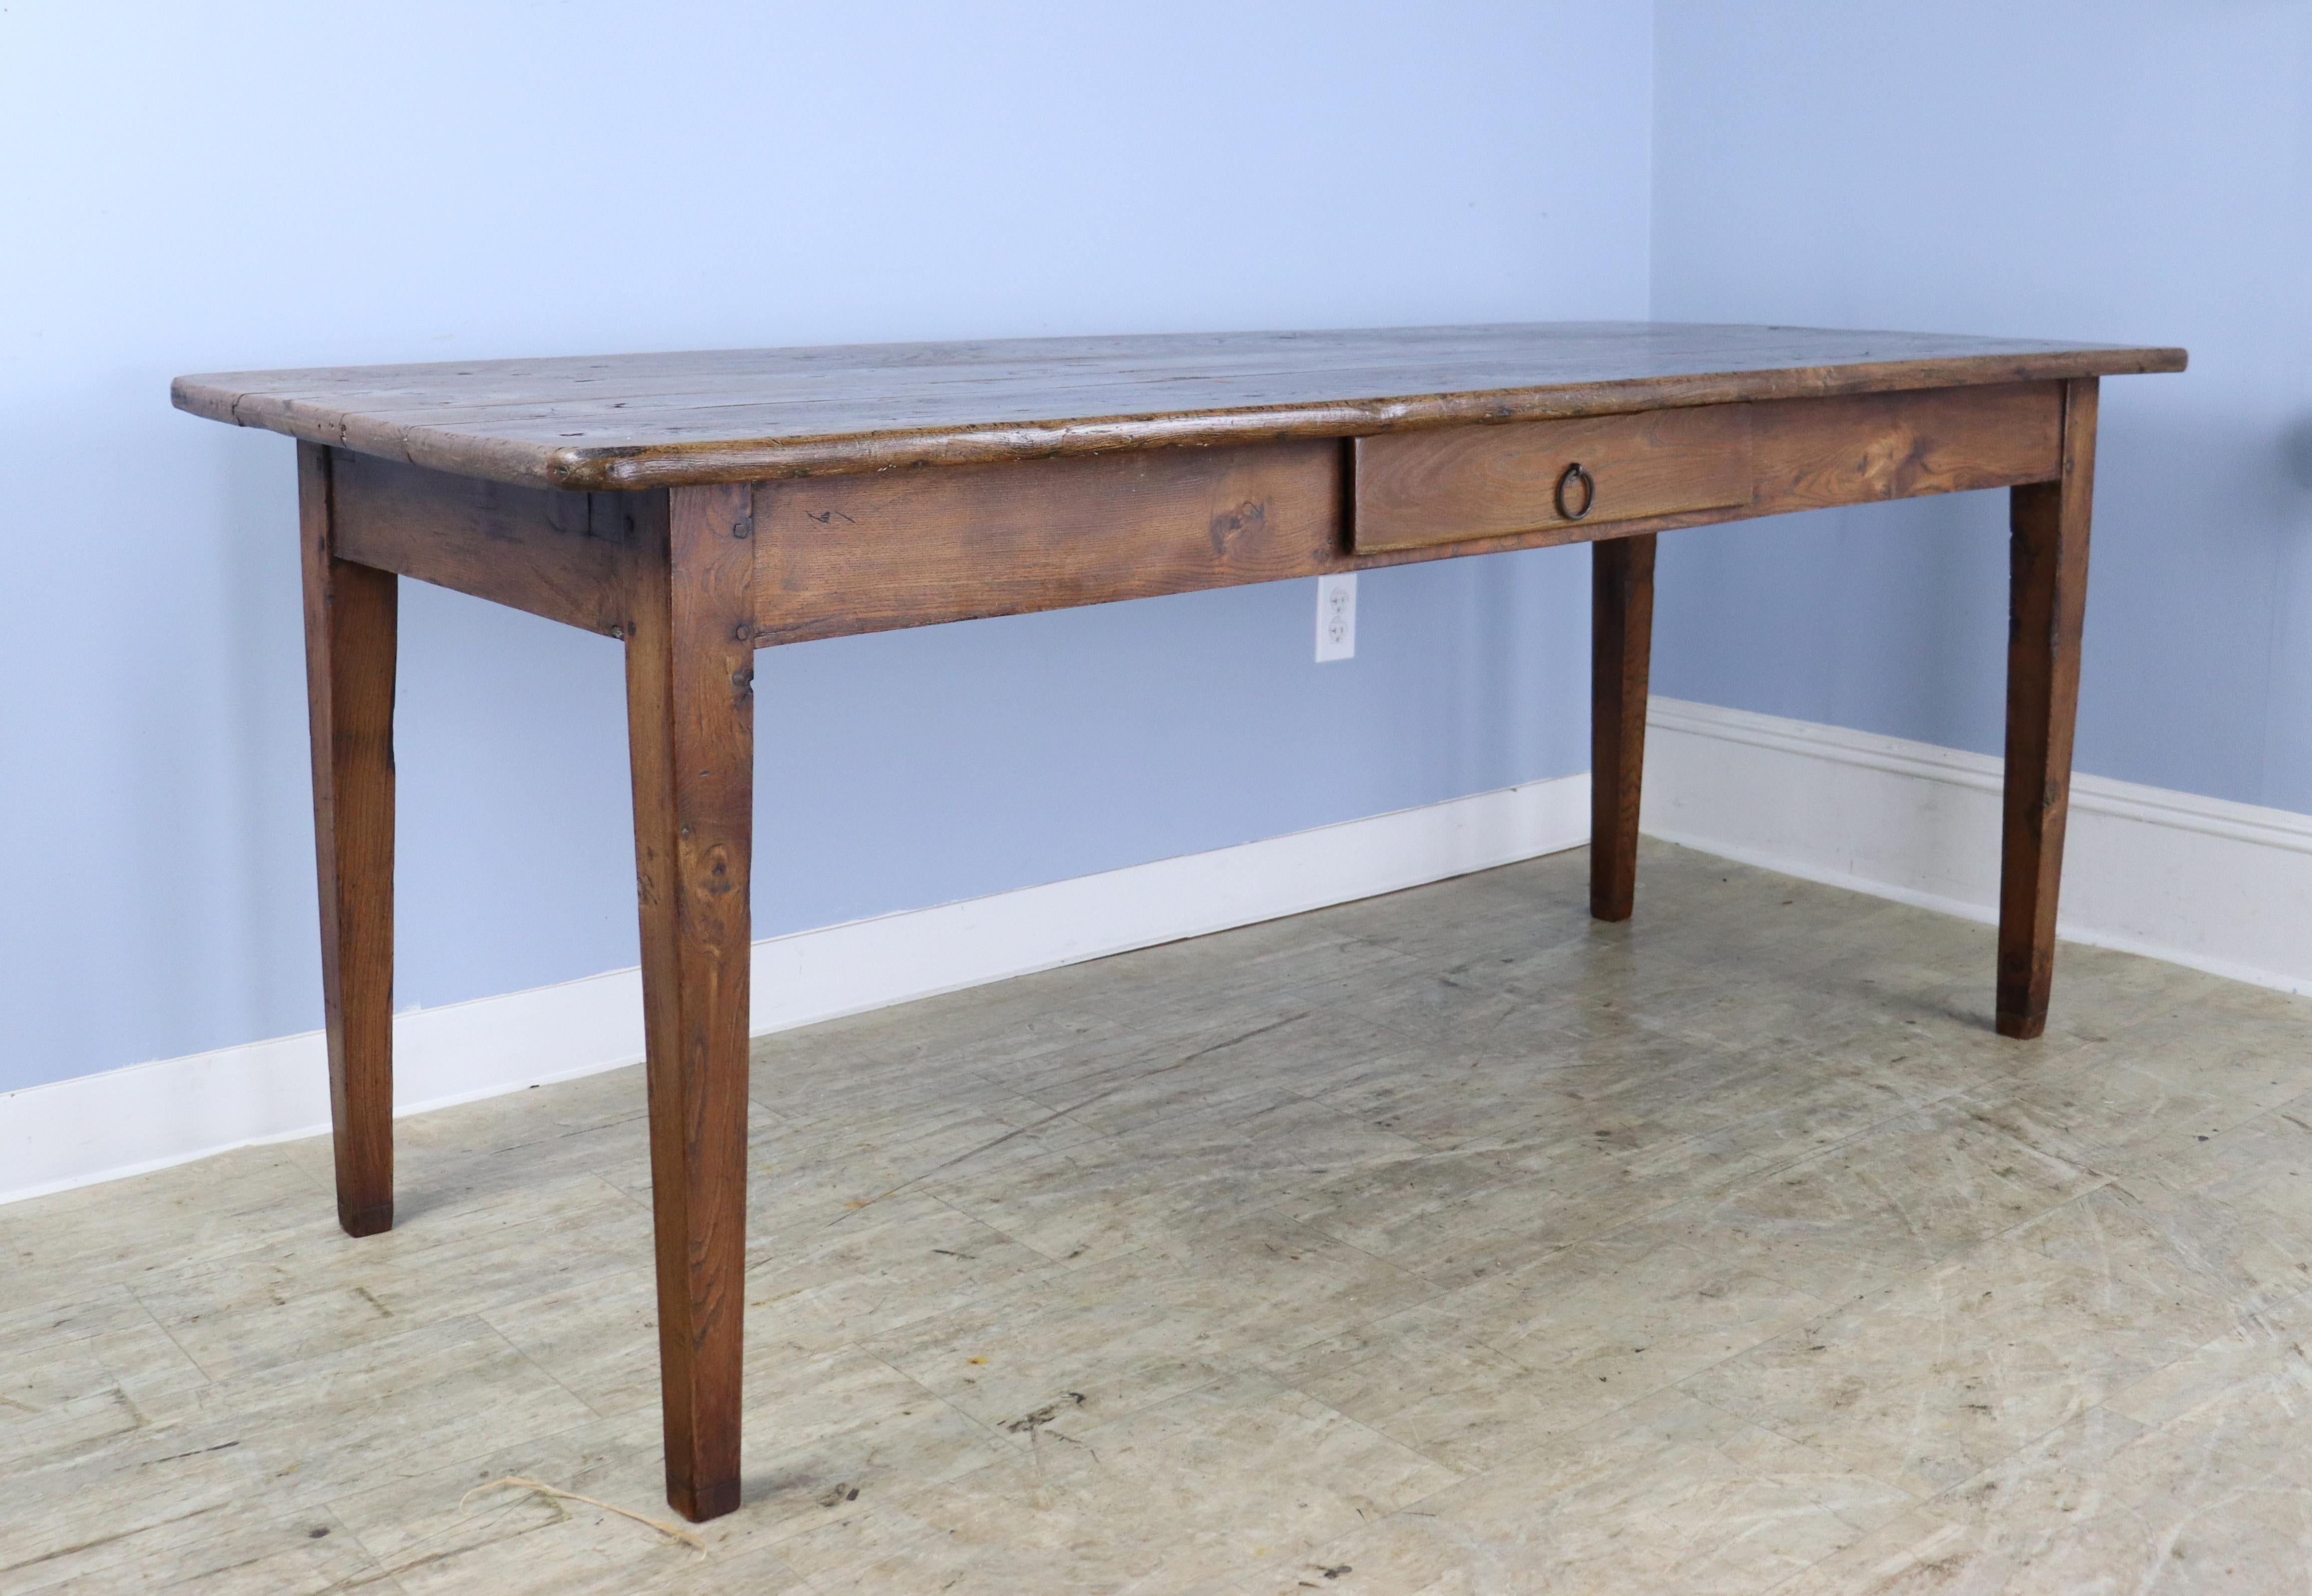 A handsome elm dining table or farm table with elegant tapered legs and a useful drawer. The top has lovely color, grain and patina. 24.5 inch apron height is good for knees and there are 64.5 inches between the legs on the long side. Nice size and